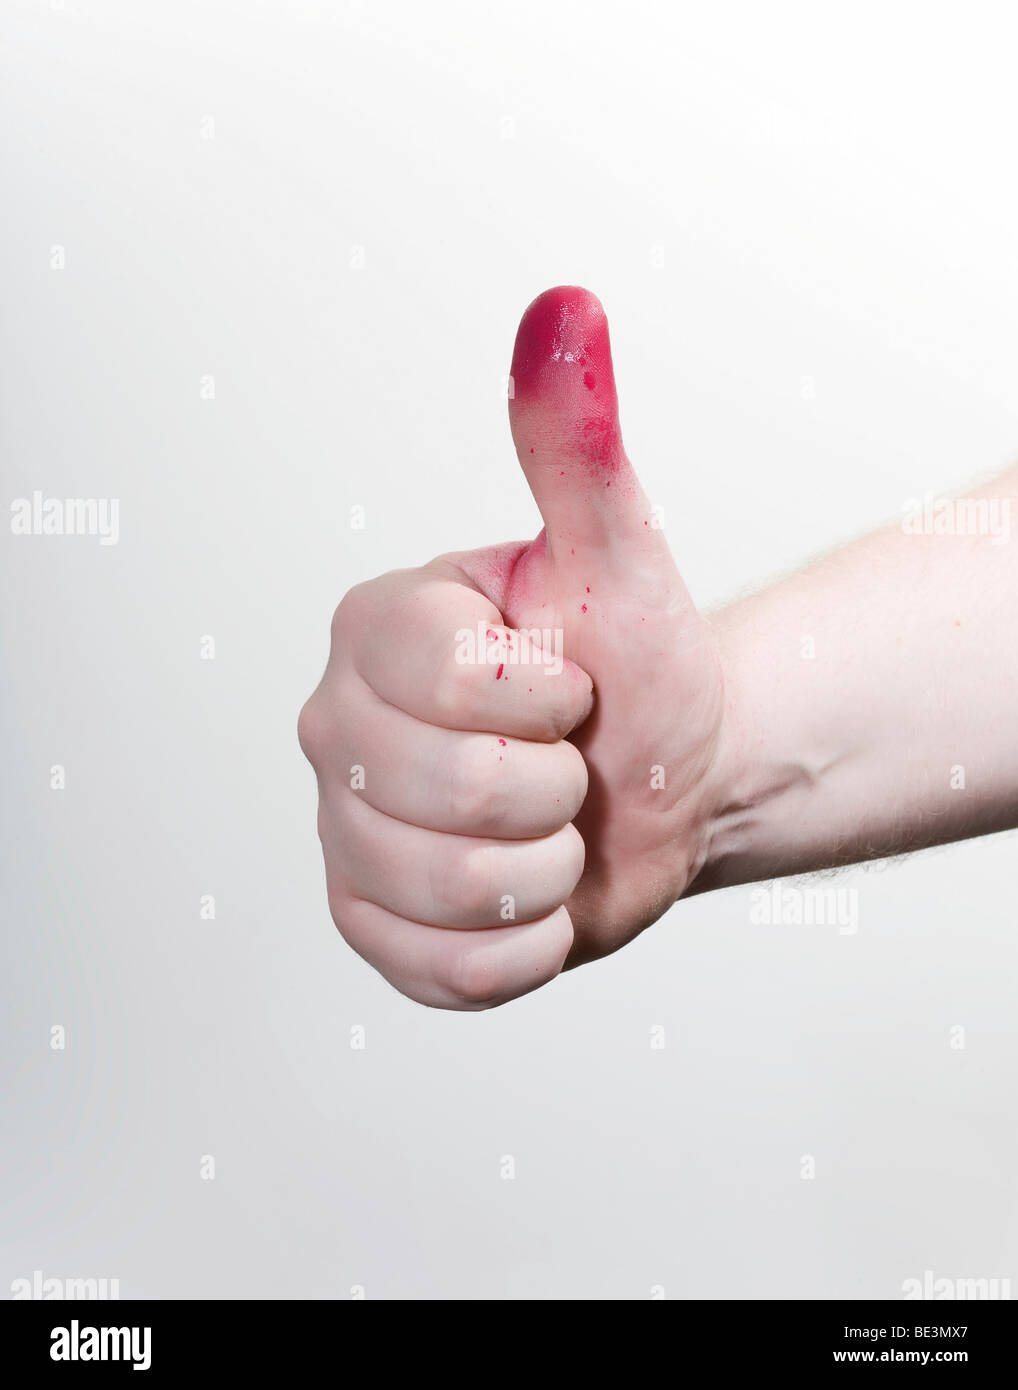 Thumbs up with spray paint Stock Photo